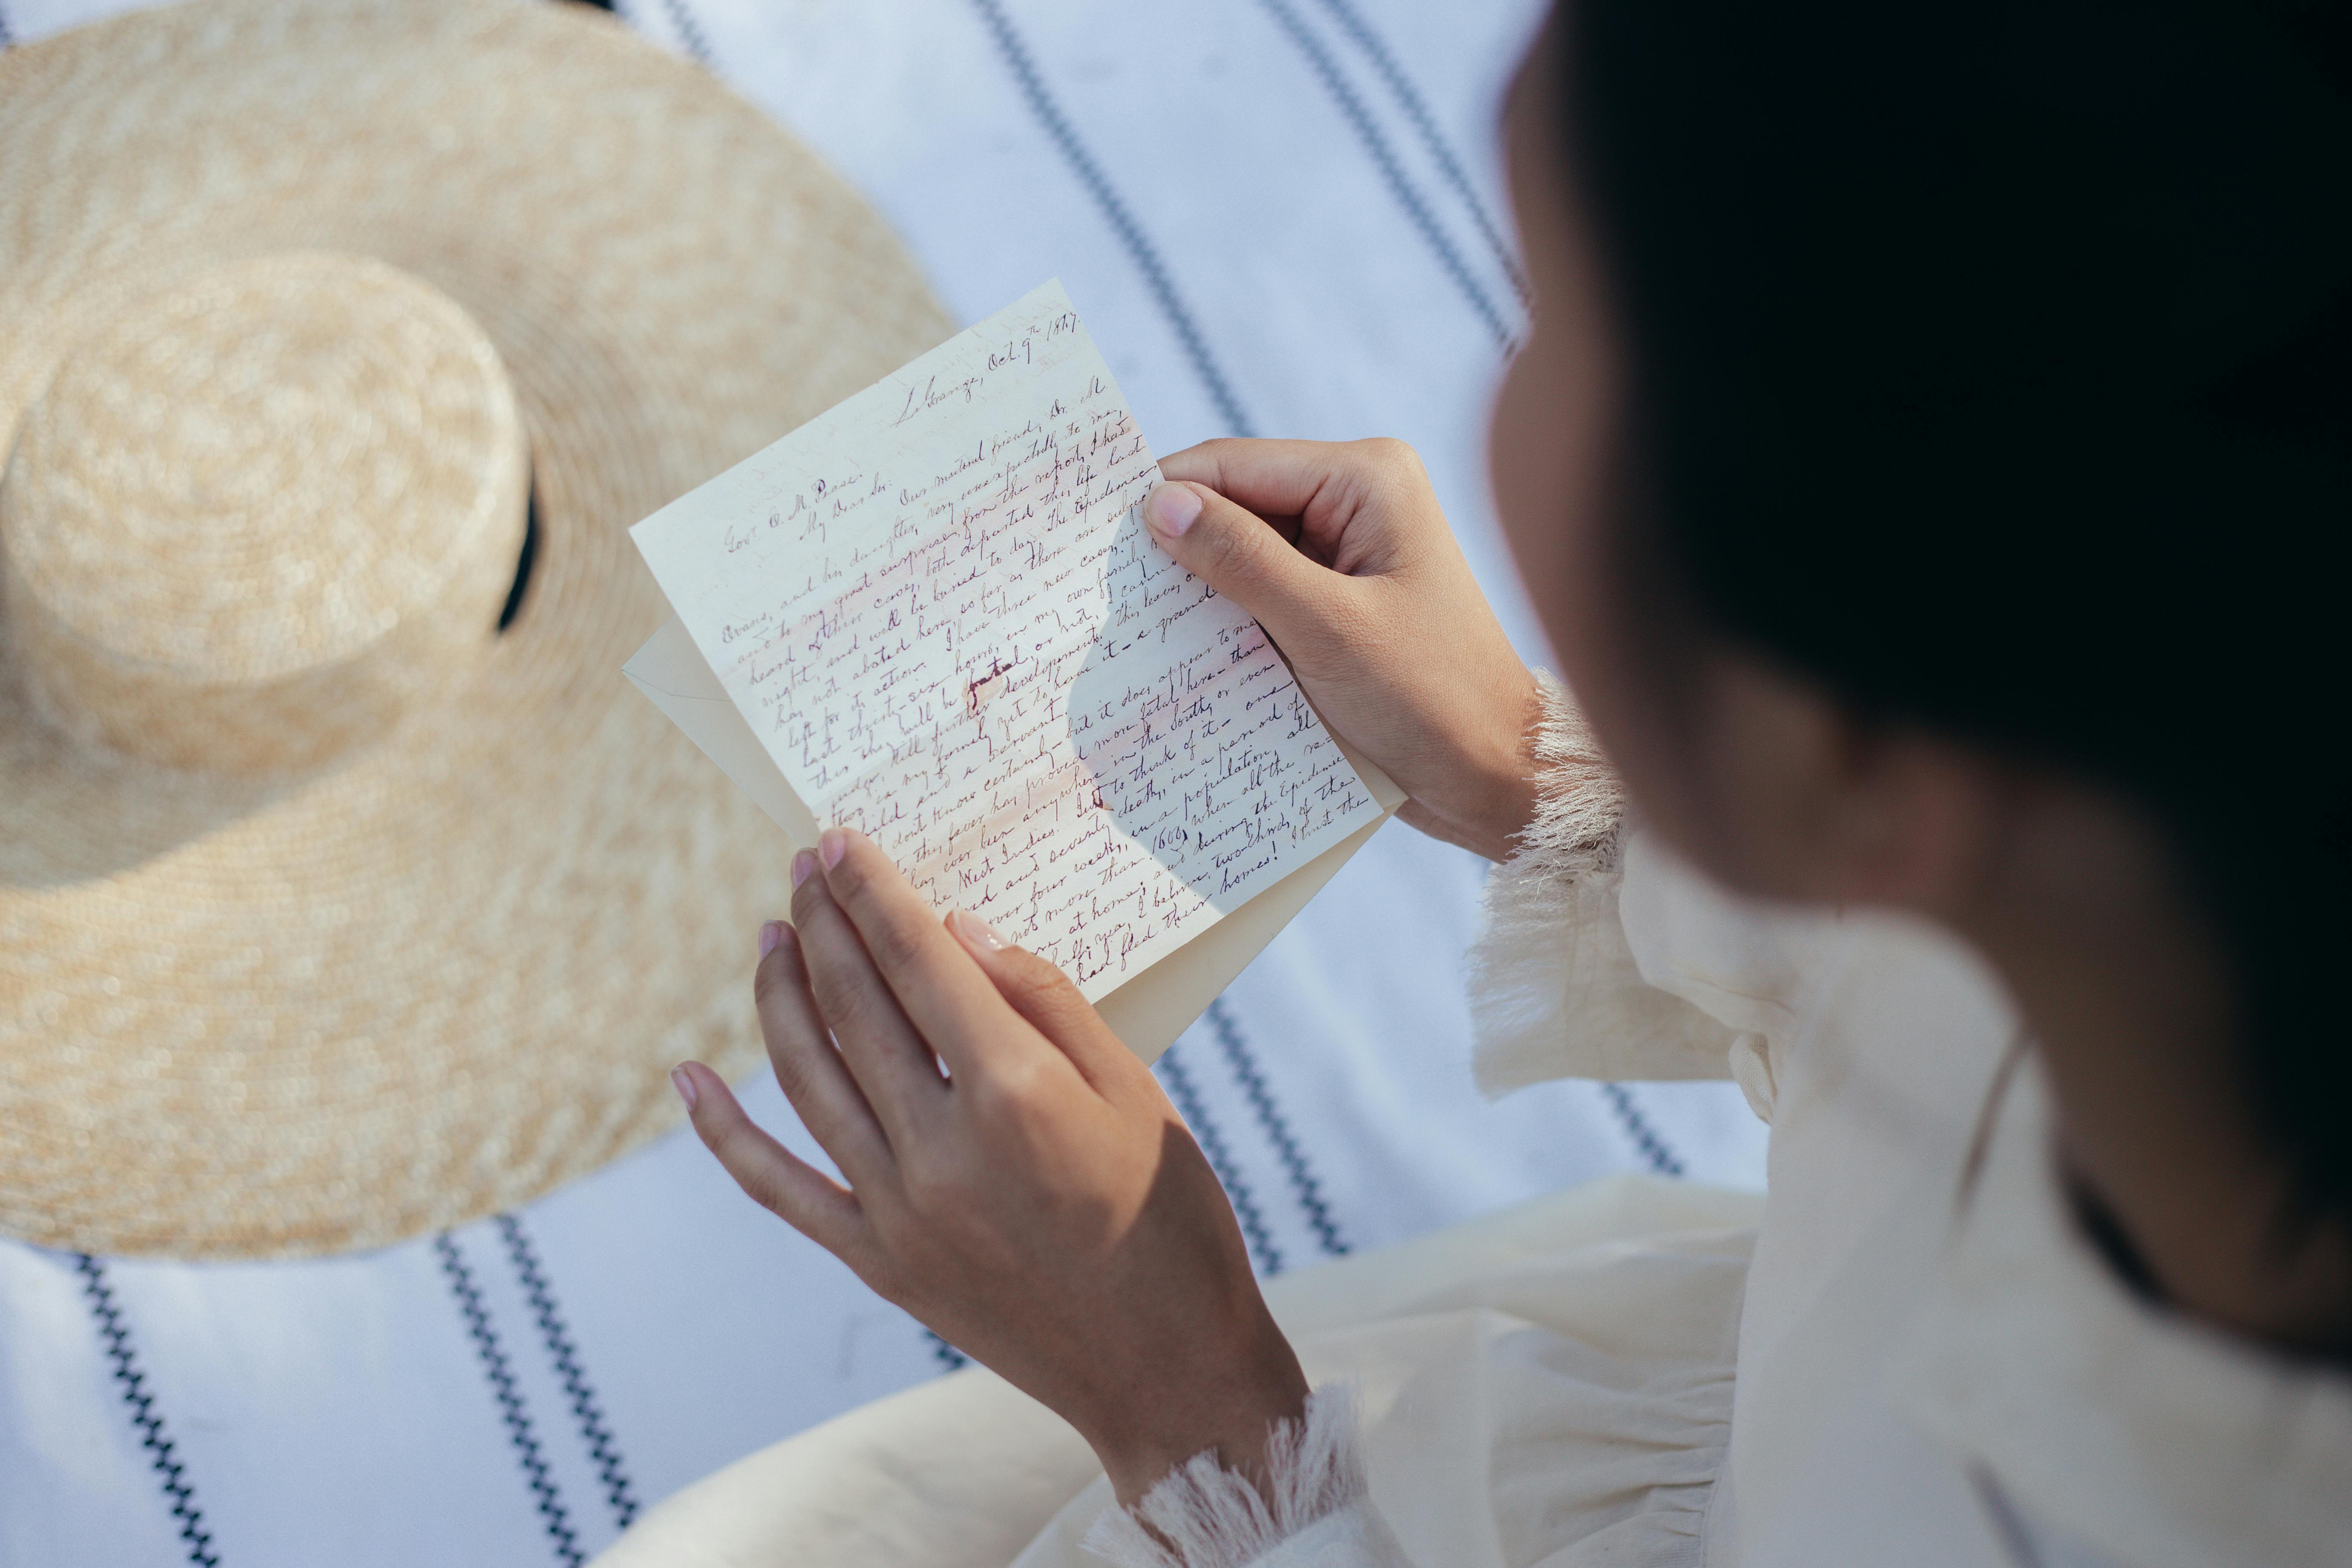 A woman reading a letter | Source: Pexels